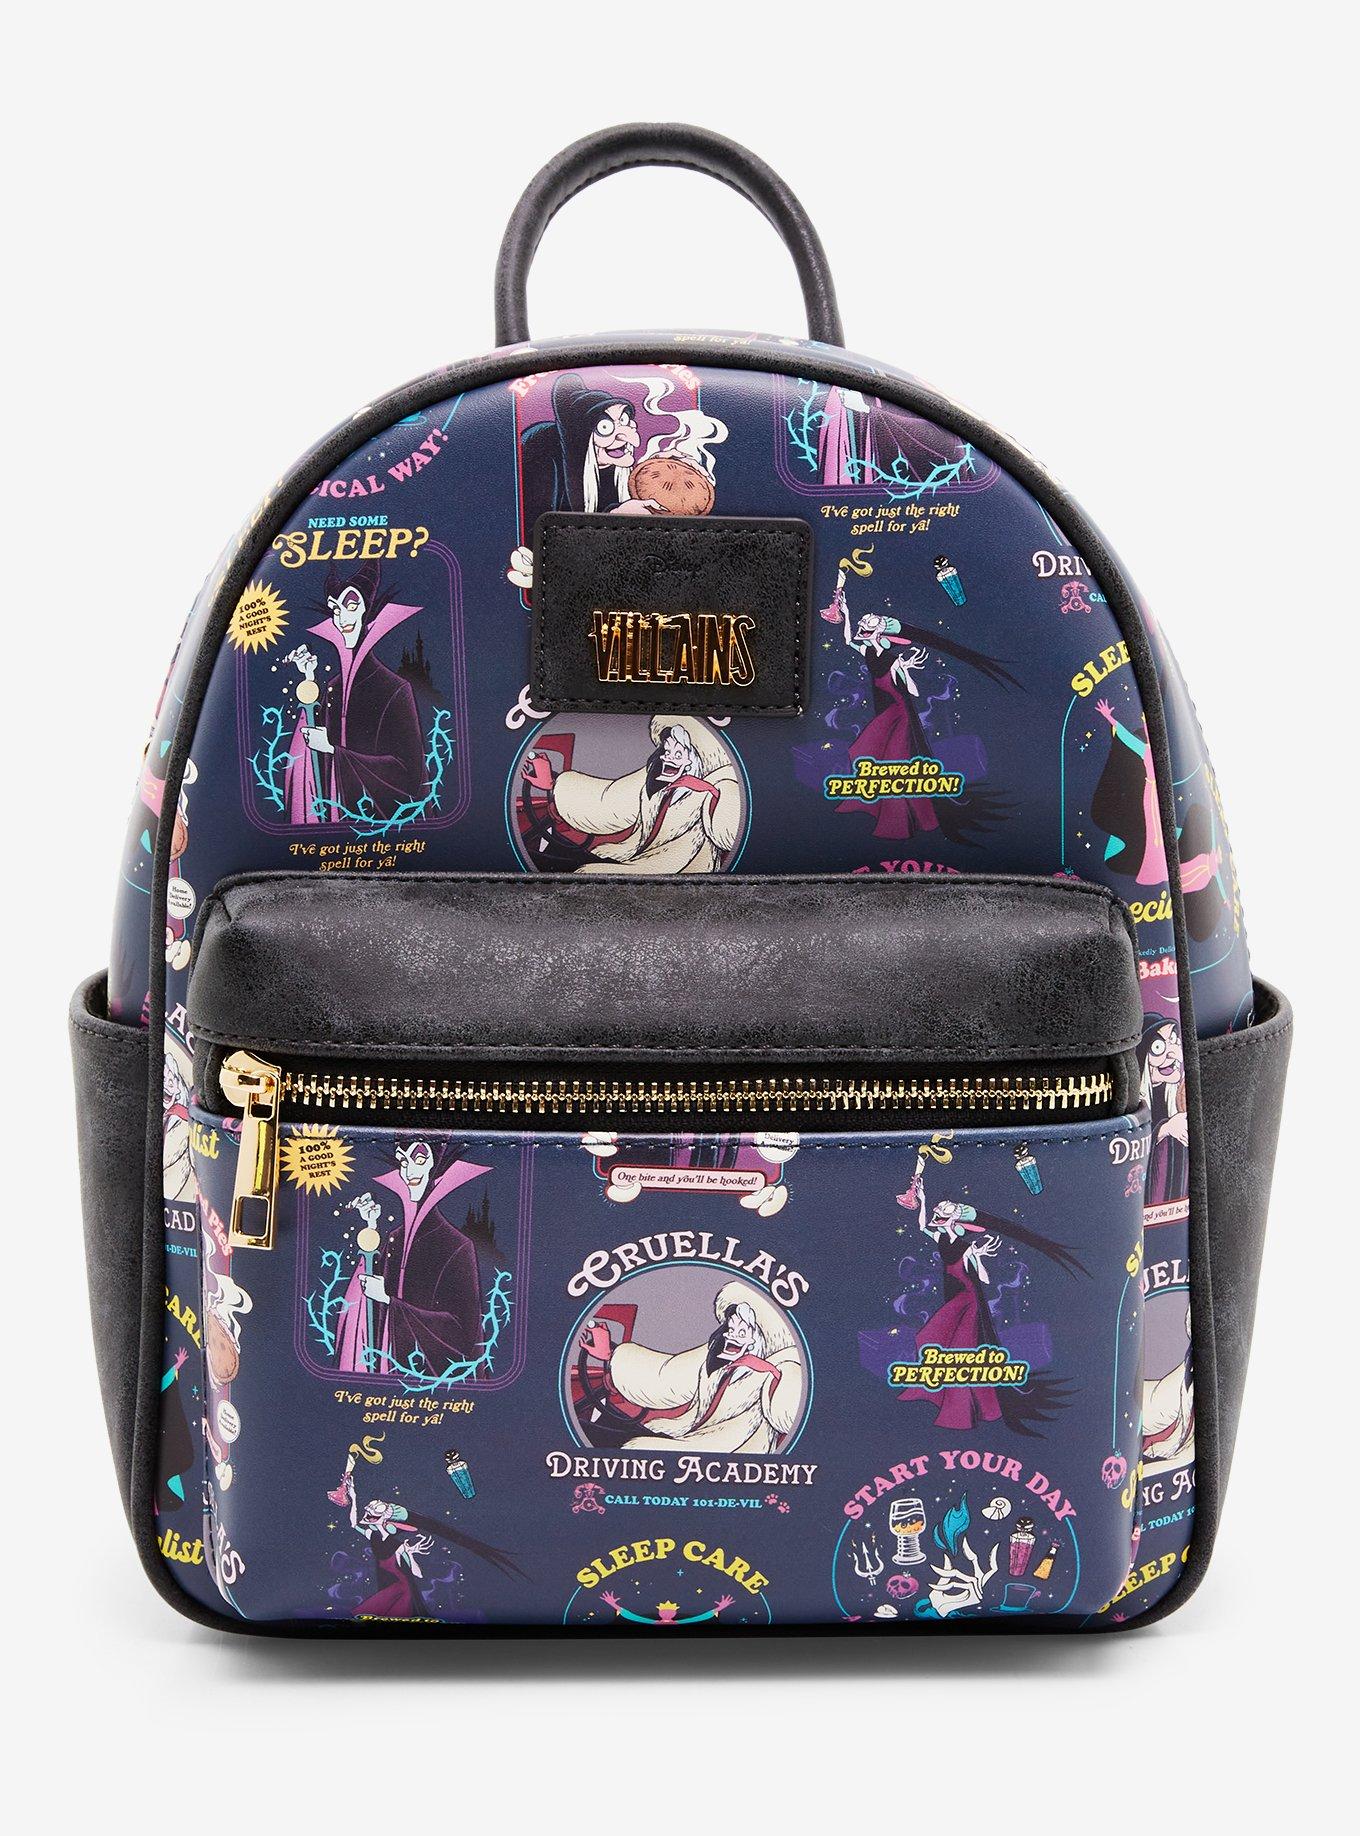 Get Grungy With This New Disney Villains Loungefly Backpack!